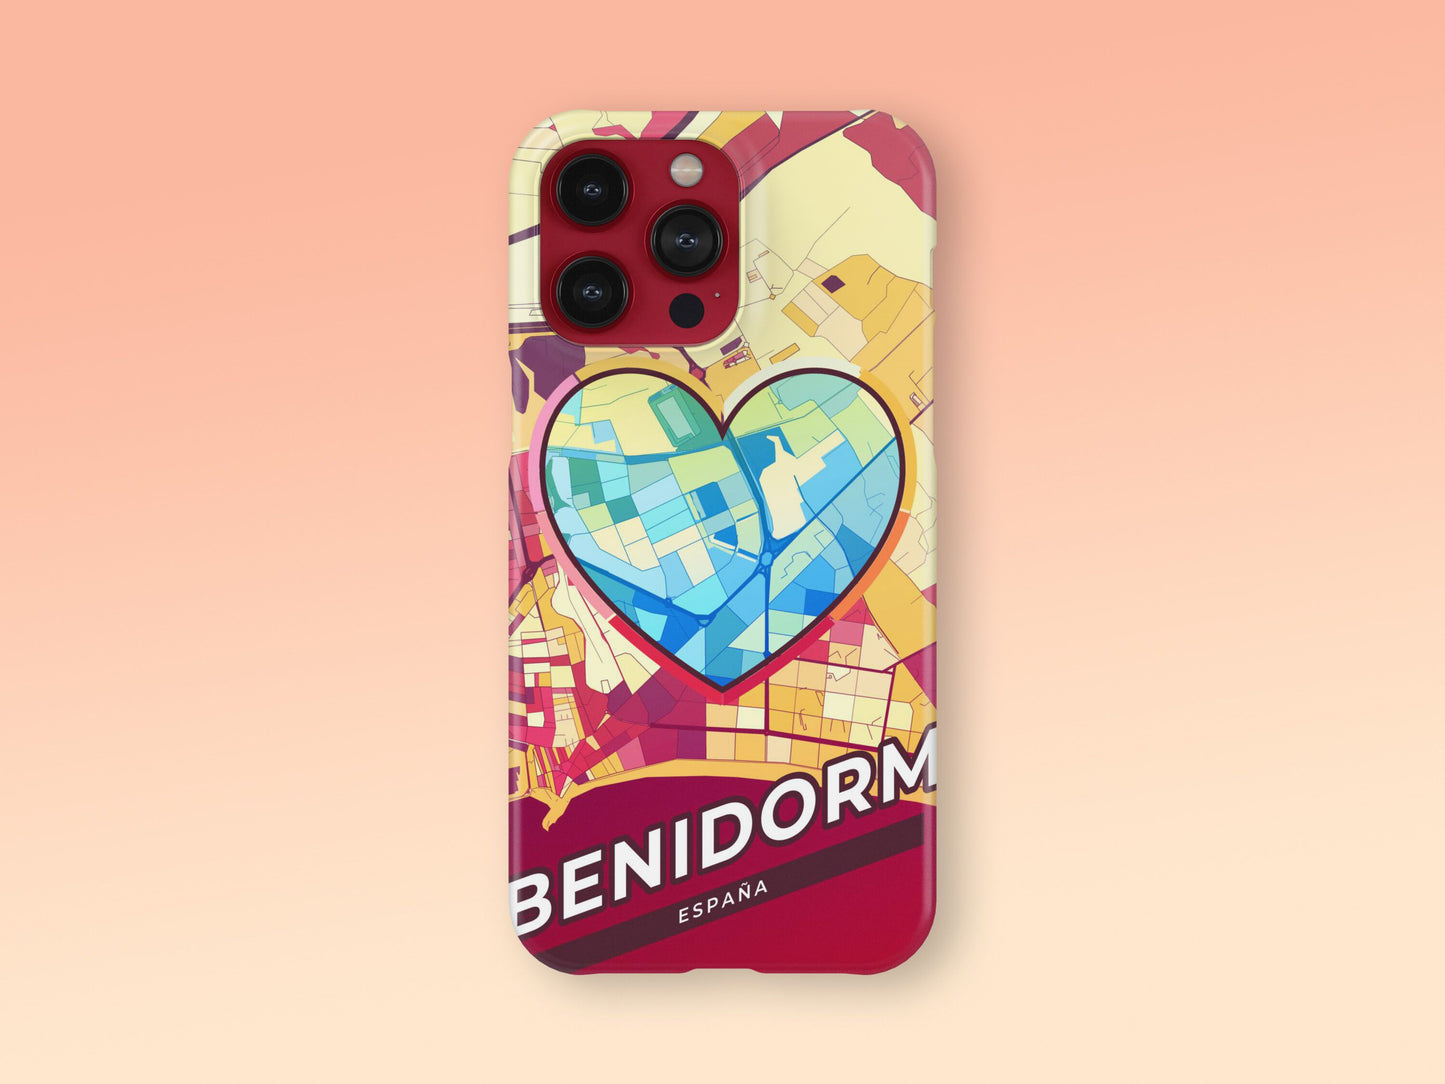 Benidorm Spain slim phone case with colorful icon. Birthday, wedding or housewarming gift. Couple match cases. 2